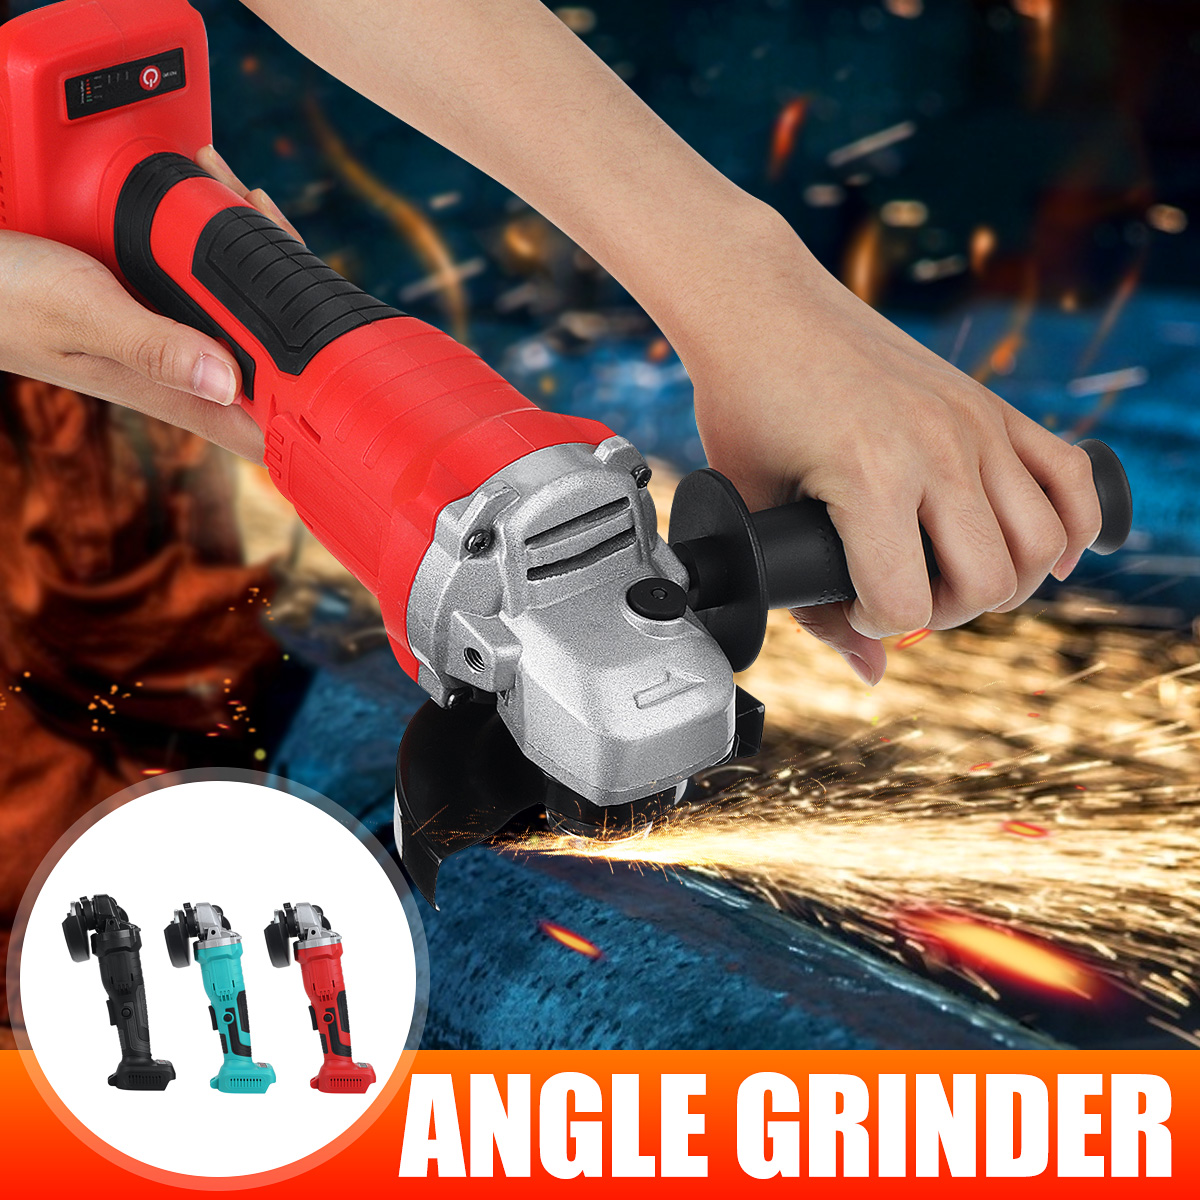 125mm-Cordless-Electric-Angle-Grinder-Cutting-Machine-Polisher-DIY-Power-Tool-1743685-2